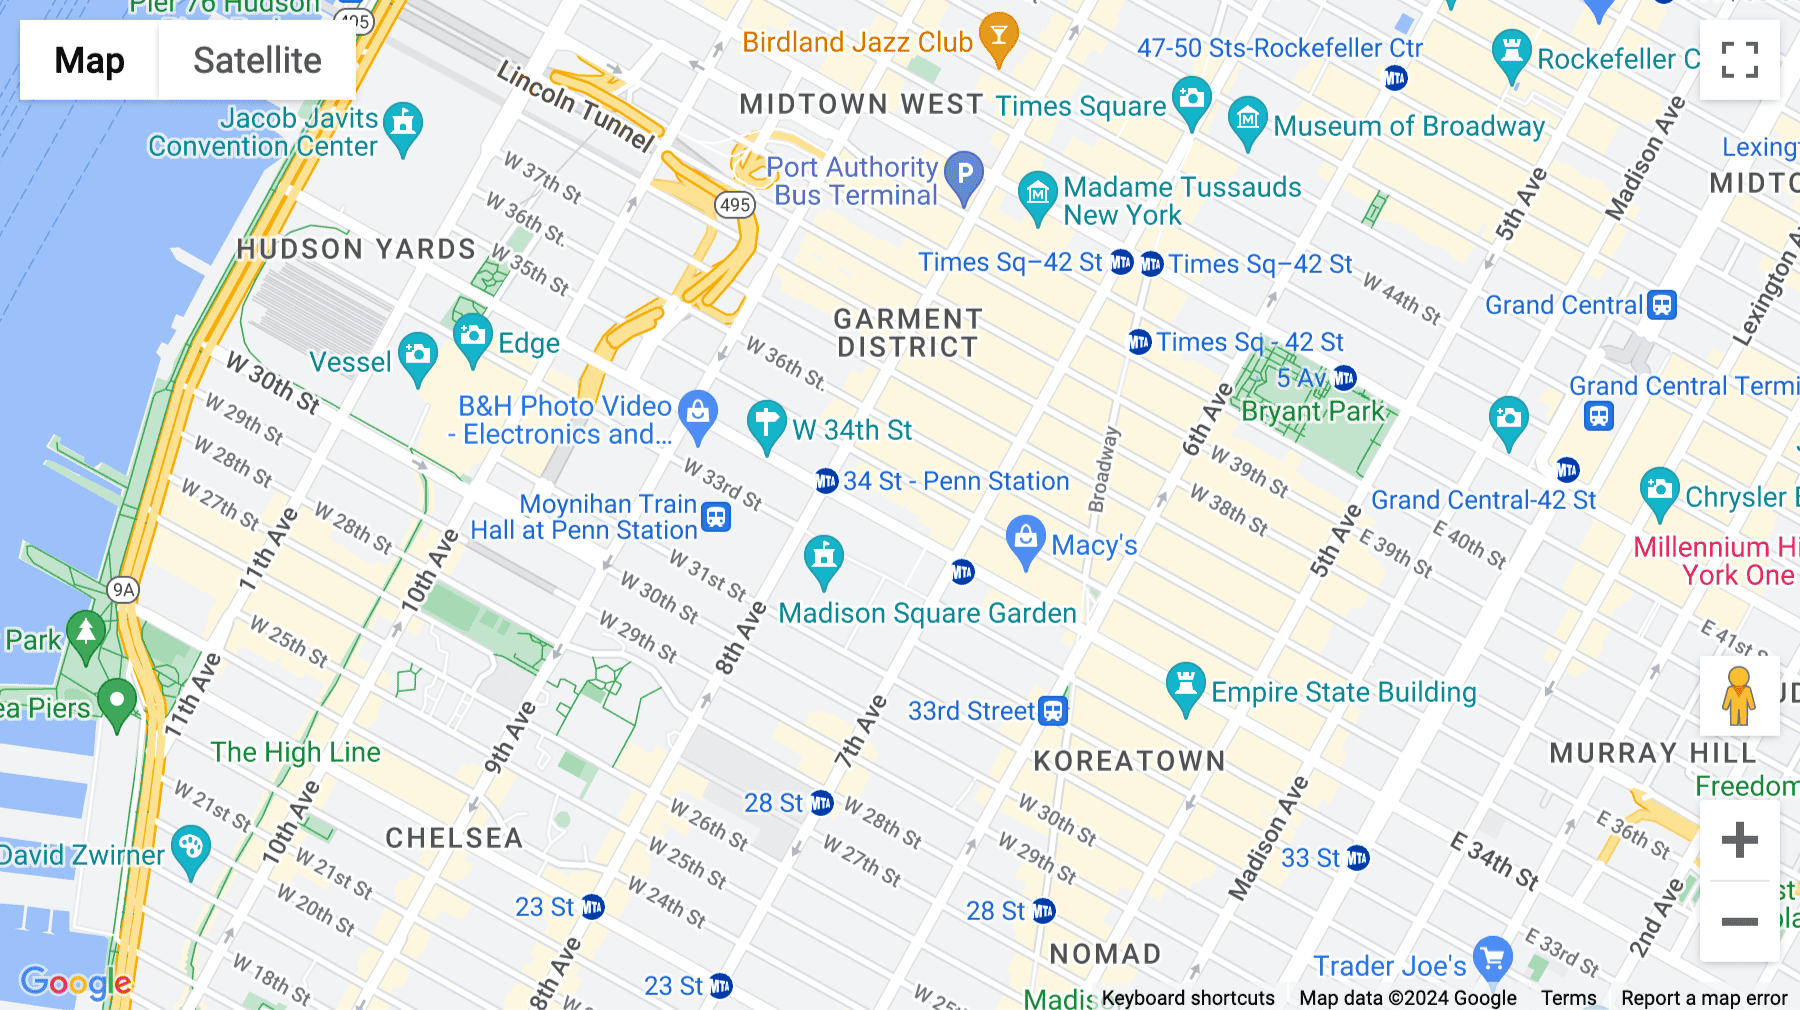 Click for interative map of 14 Penn Plaza, 225 West 34th Street, New York City